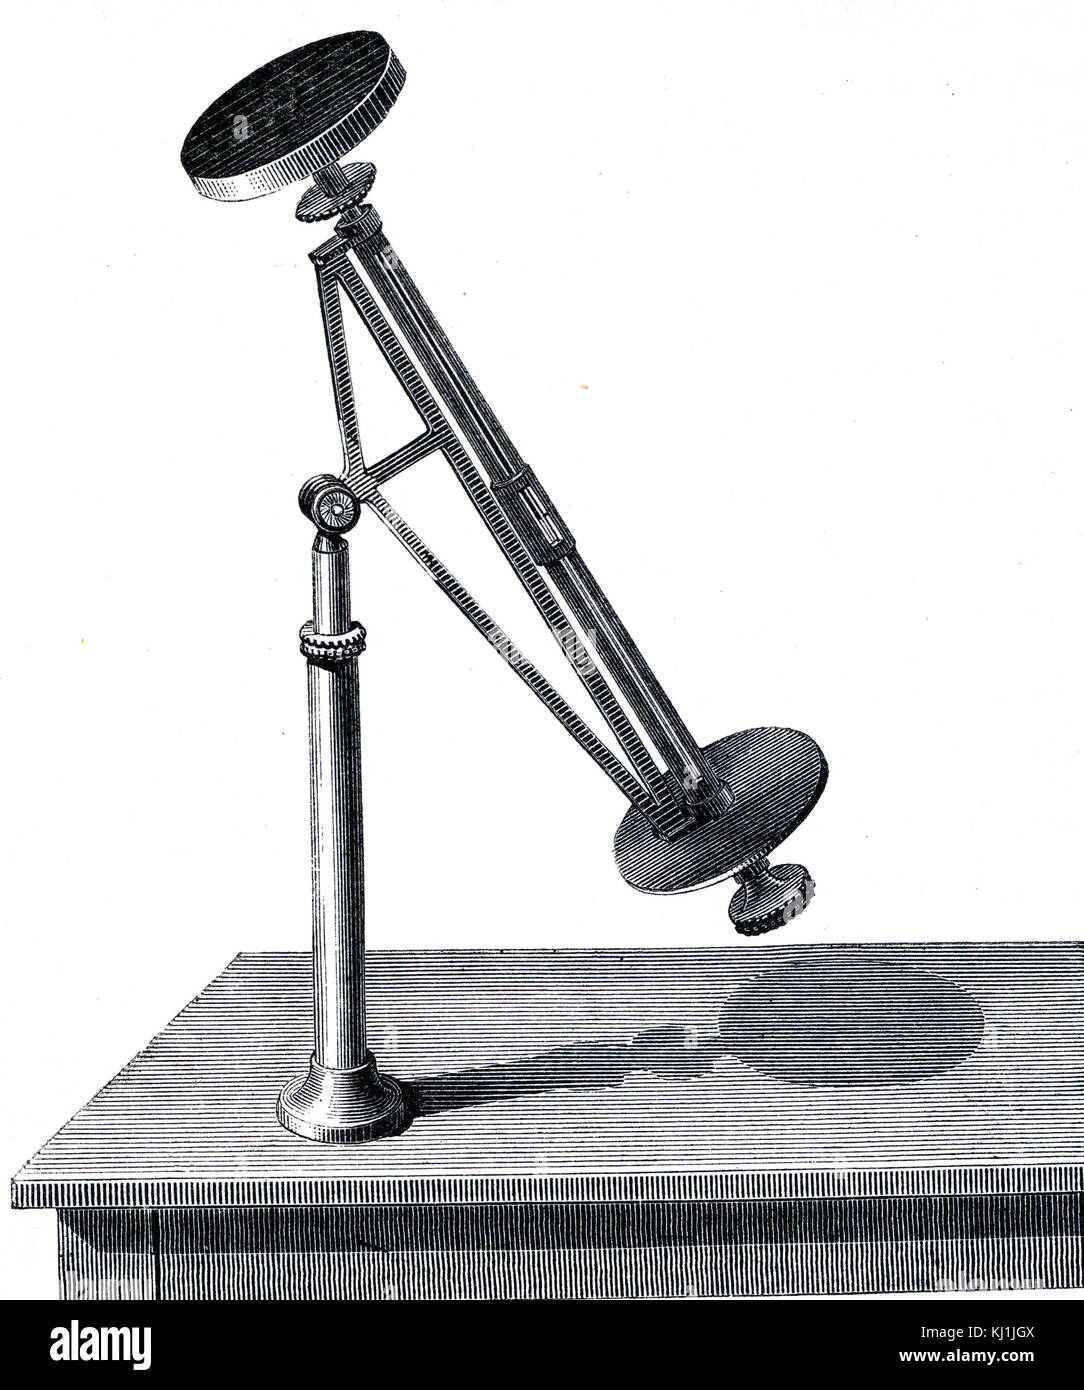 Engraving depicting Pouillet's Pyrheliometer, used to measure the amount of solar heat reaching the earth's surface. Claude Pouillet (1790-1868) a French physicist and a professor of physics at the Sorbonne and member of the French Academy of Sciences. Dated 19th Century Stock Photo